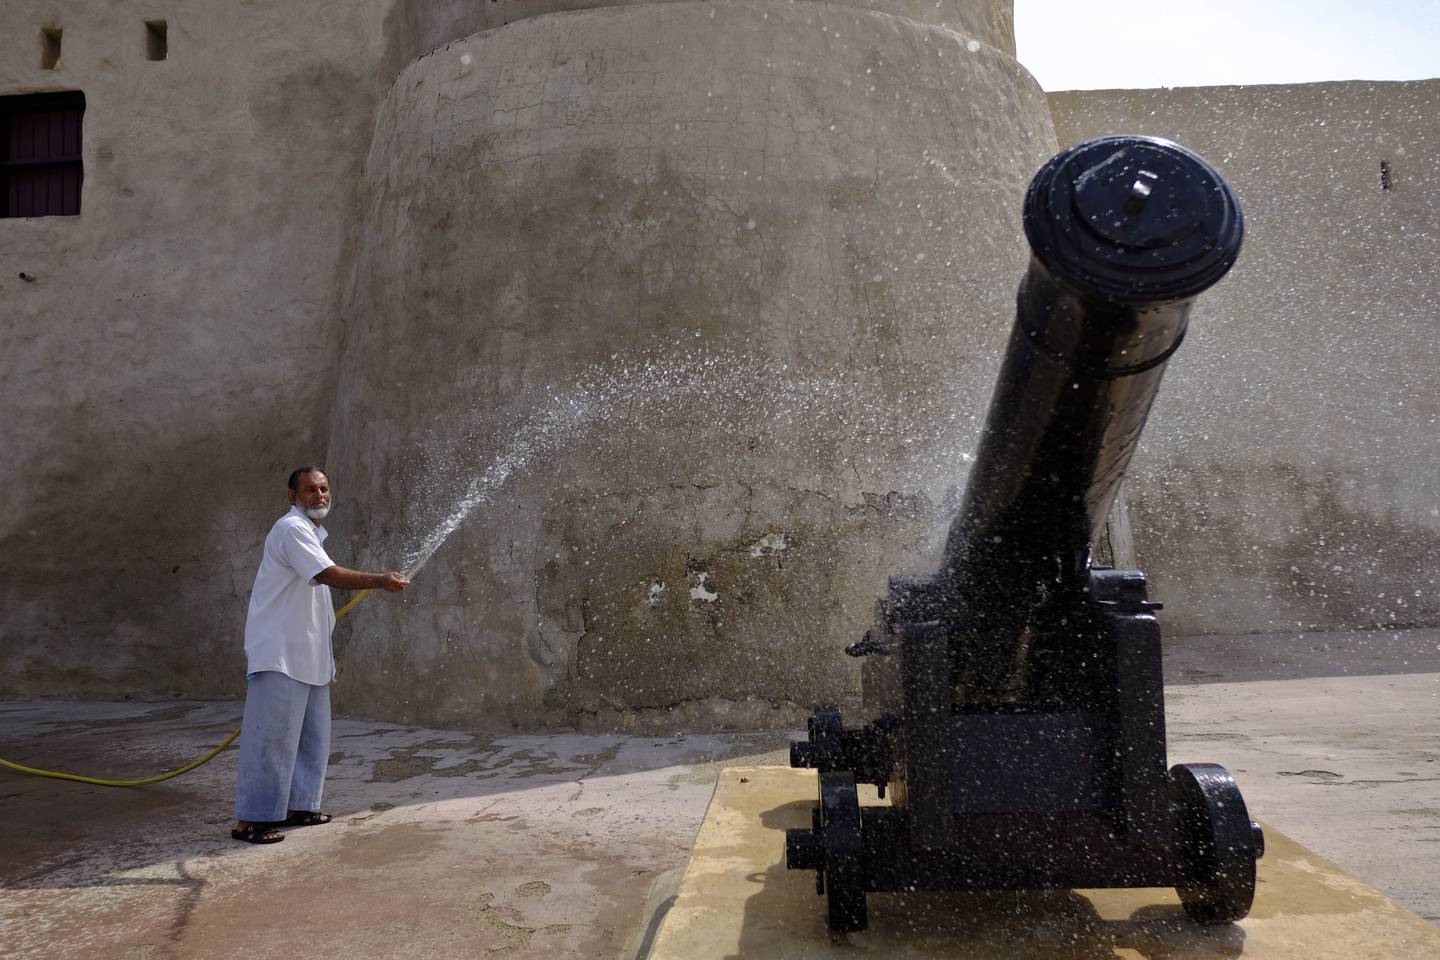 UMM AL QUWAIN, UNITED ARAB EMIRATES, MARCH 10, 2014. Mohammed Nazeen (Bangladesh) washes dust from the canon displayed in the Umm Al Quwain Museum.  The fortress from 1768, which originally served as the Emiri residence, was fully restored and opened to the public in 2000.  (Photo: Antonie Robertson / The National) Journalist: Jen Bell.  Section: Northern Reporting POSSIBLE FOCAL POINT